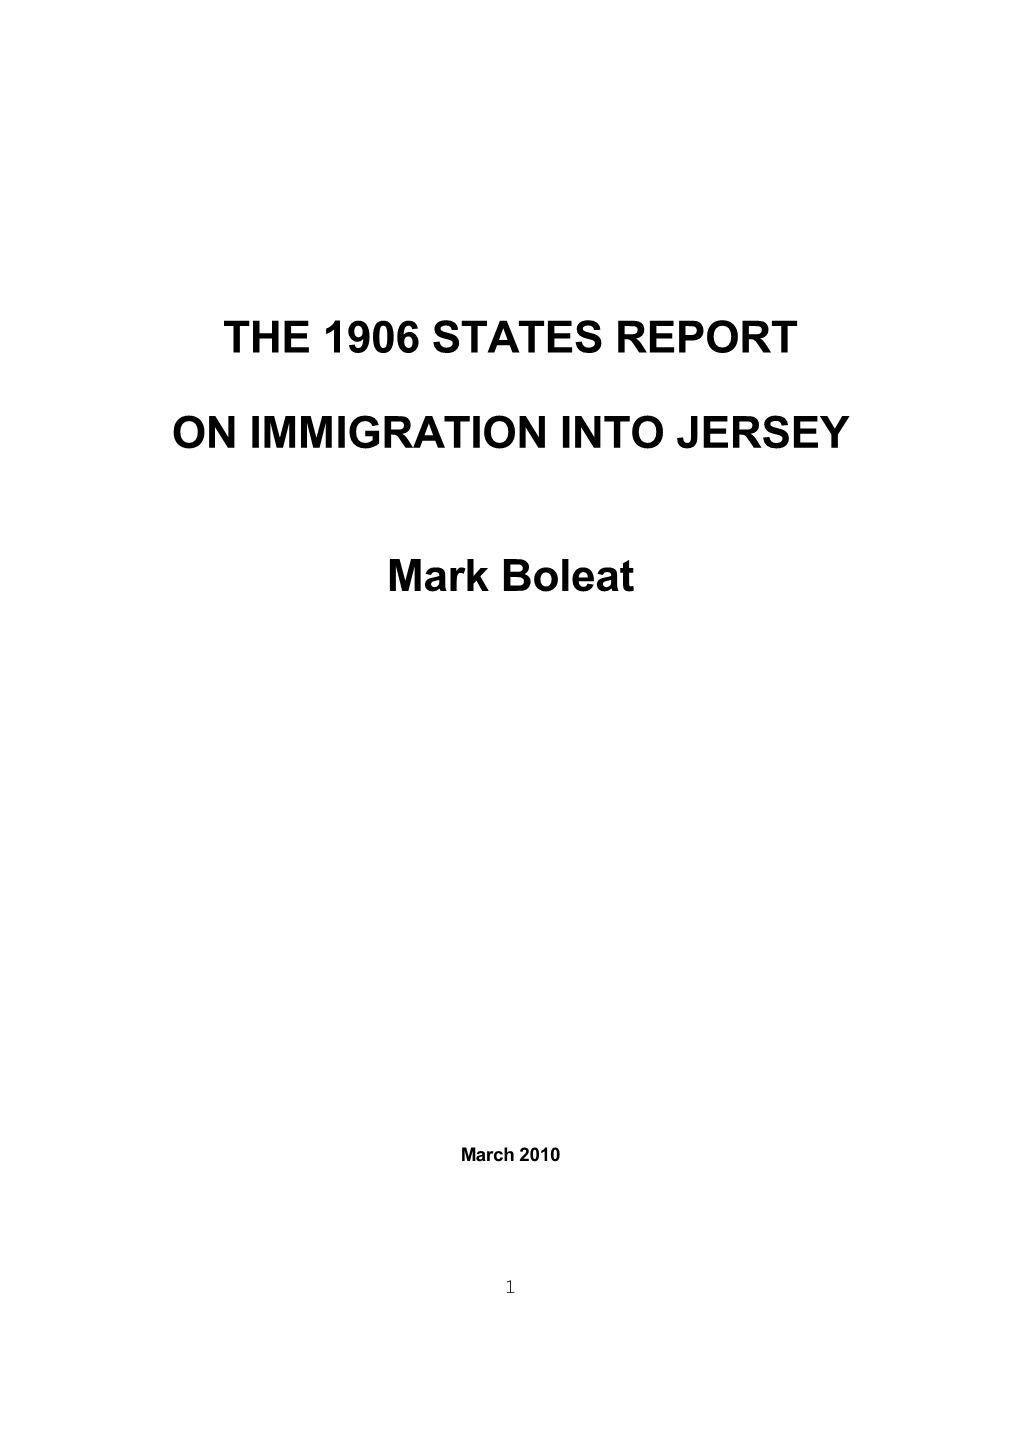 The 1906 States Report on Immigration Into Jersey